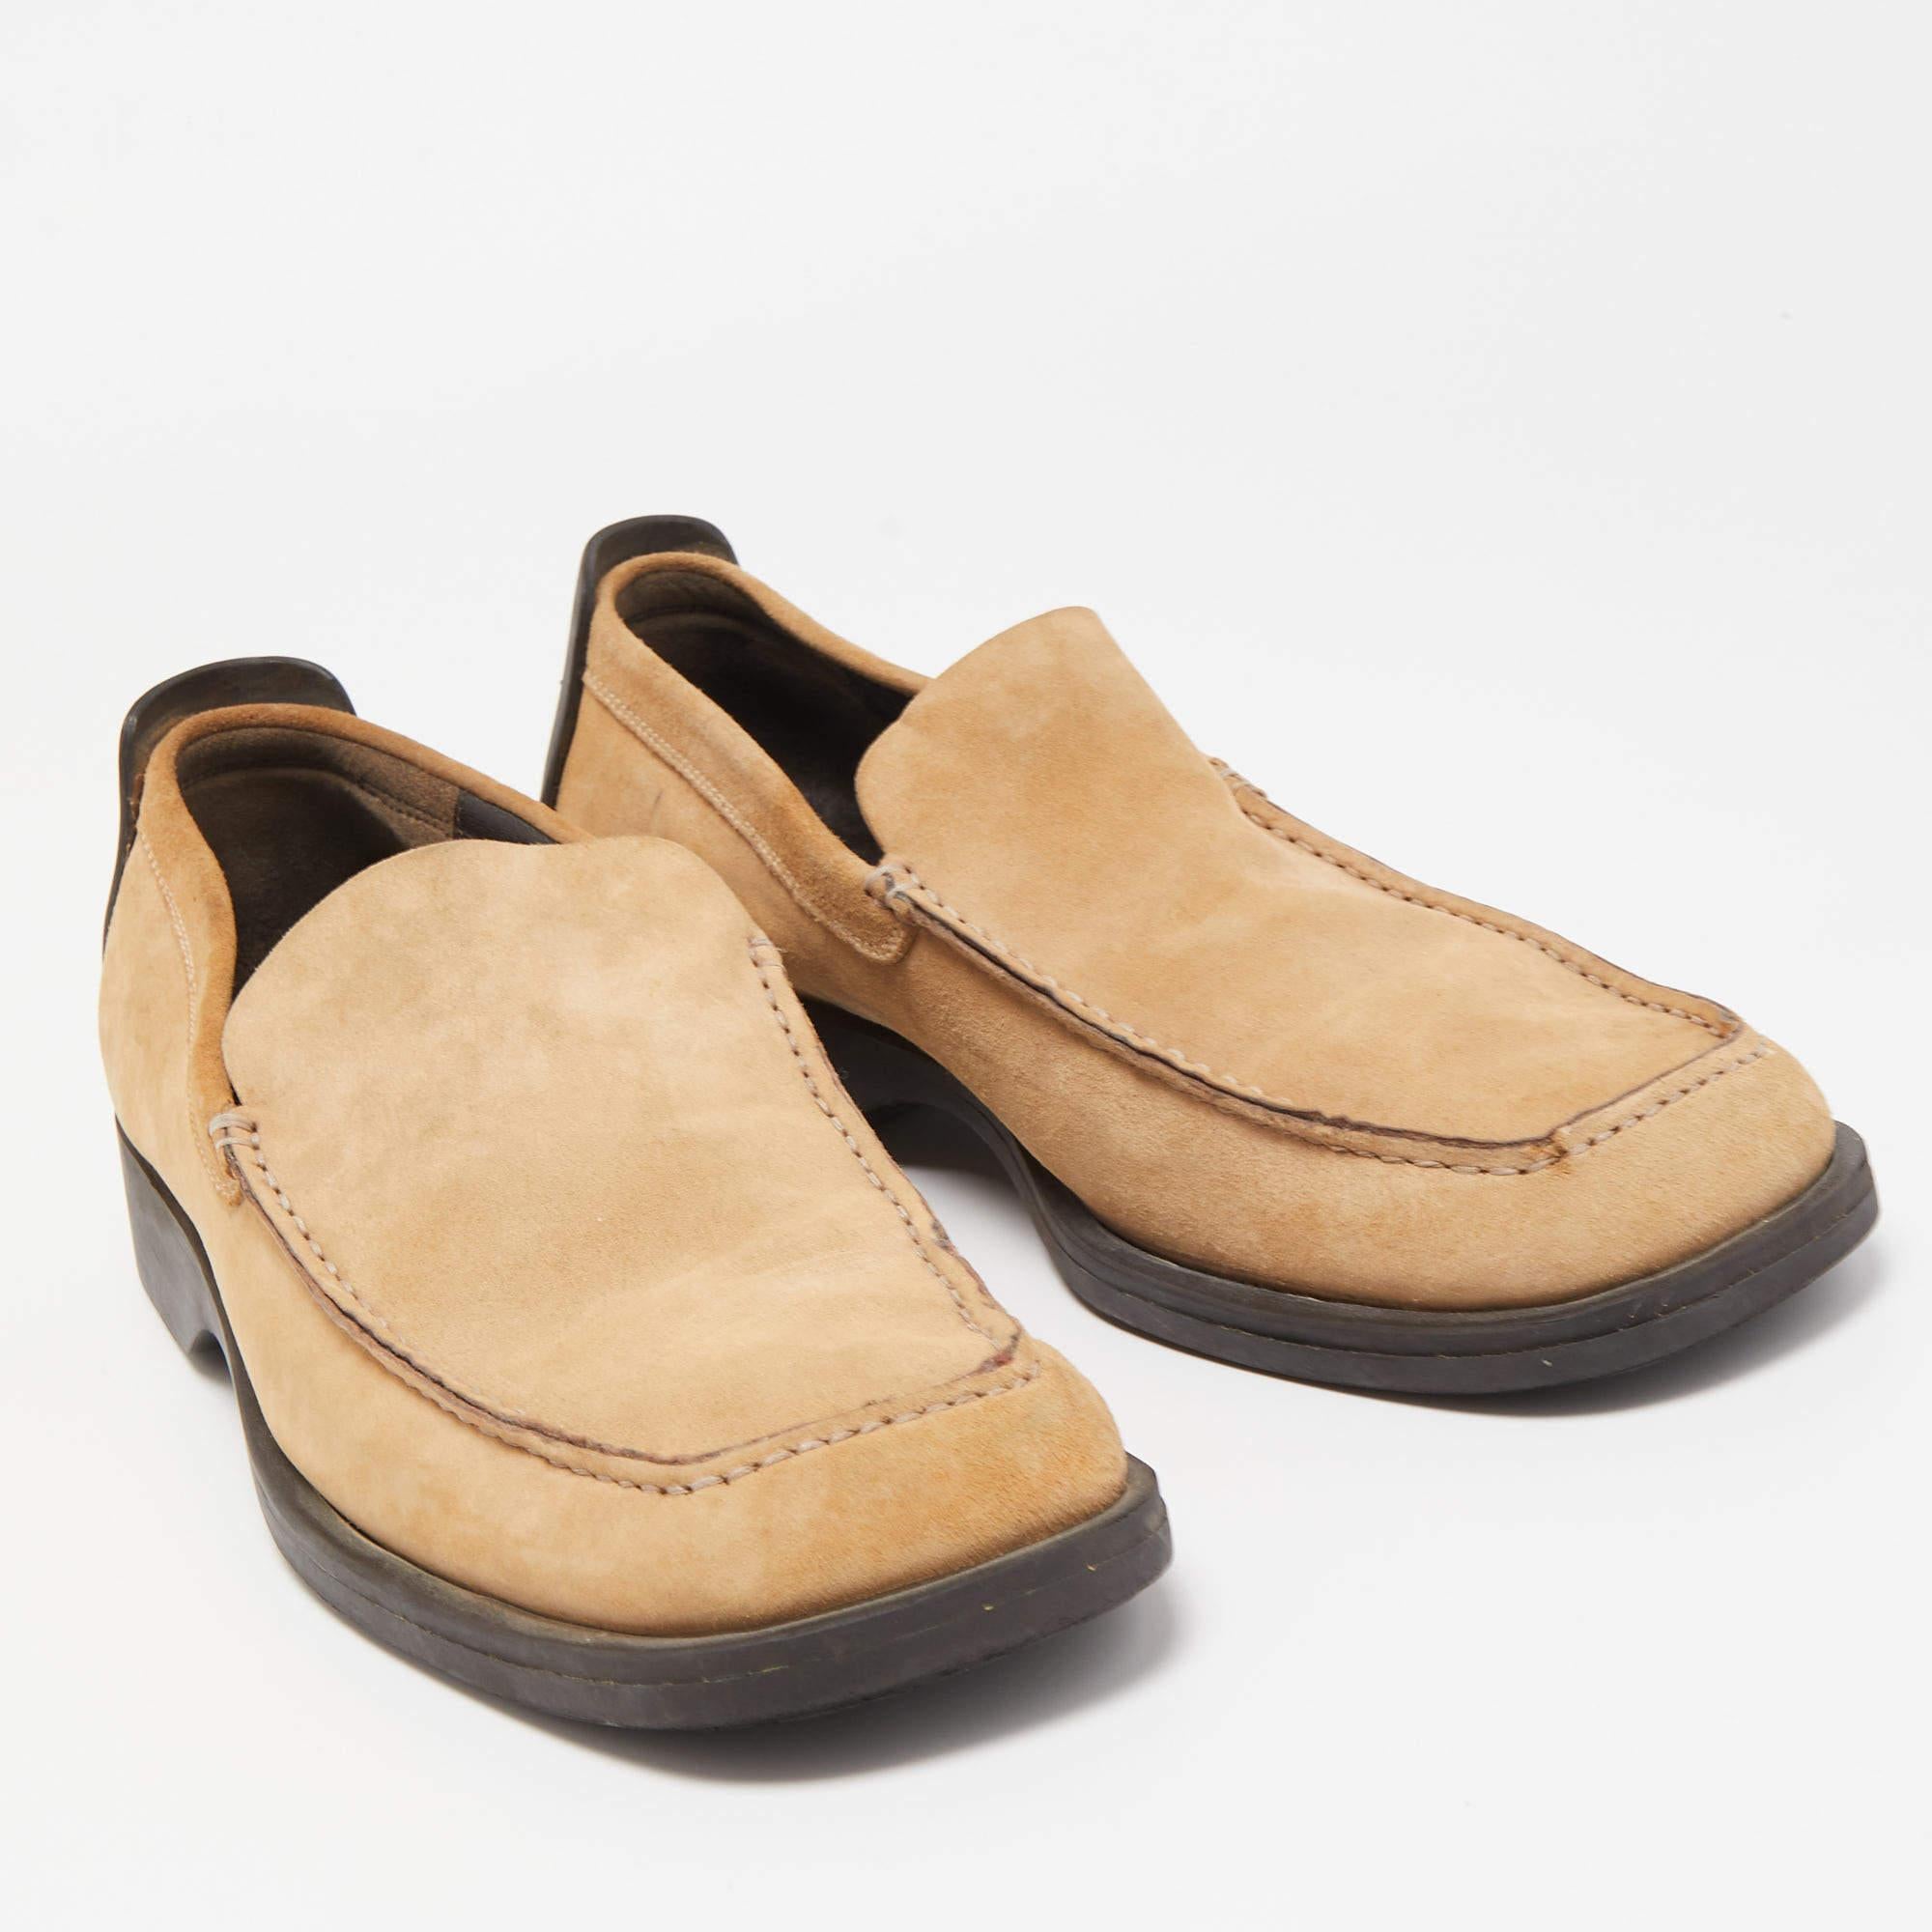 Complete a smart outfit with these loafers from Gucci. They're fashioned in beige suede and set on durable leather soles.

